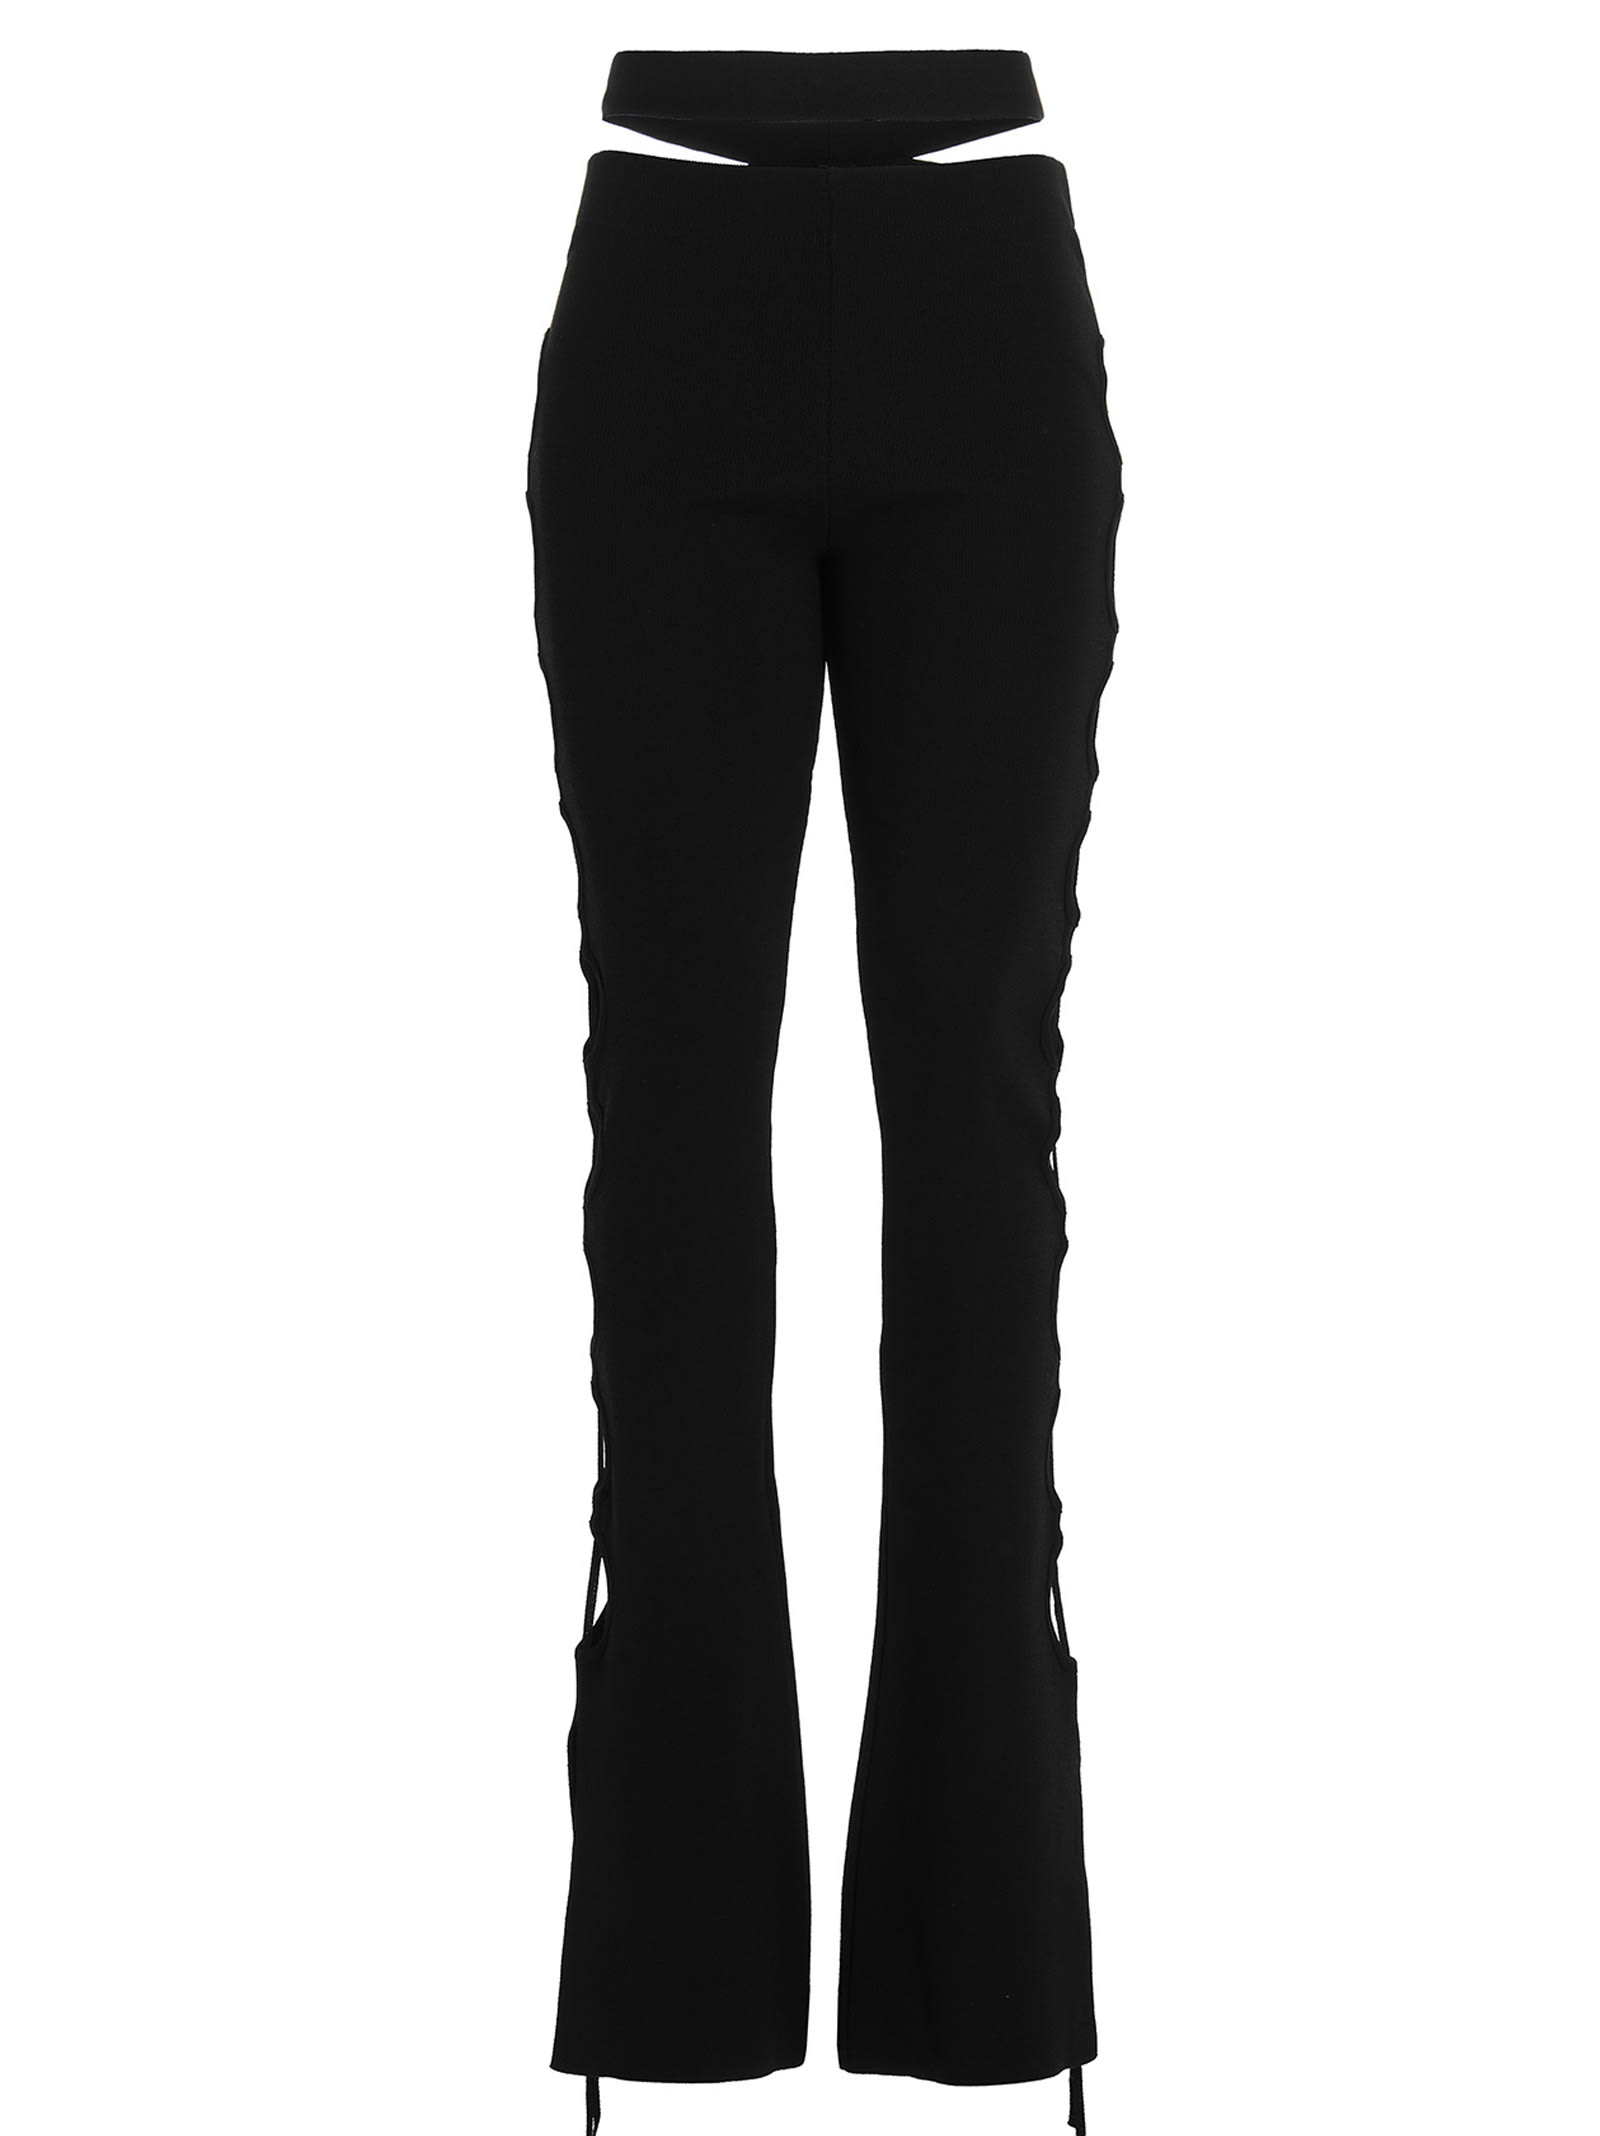 ANDREADAMO Cut Out Pants With Lacing